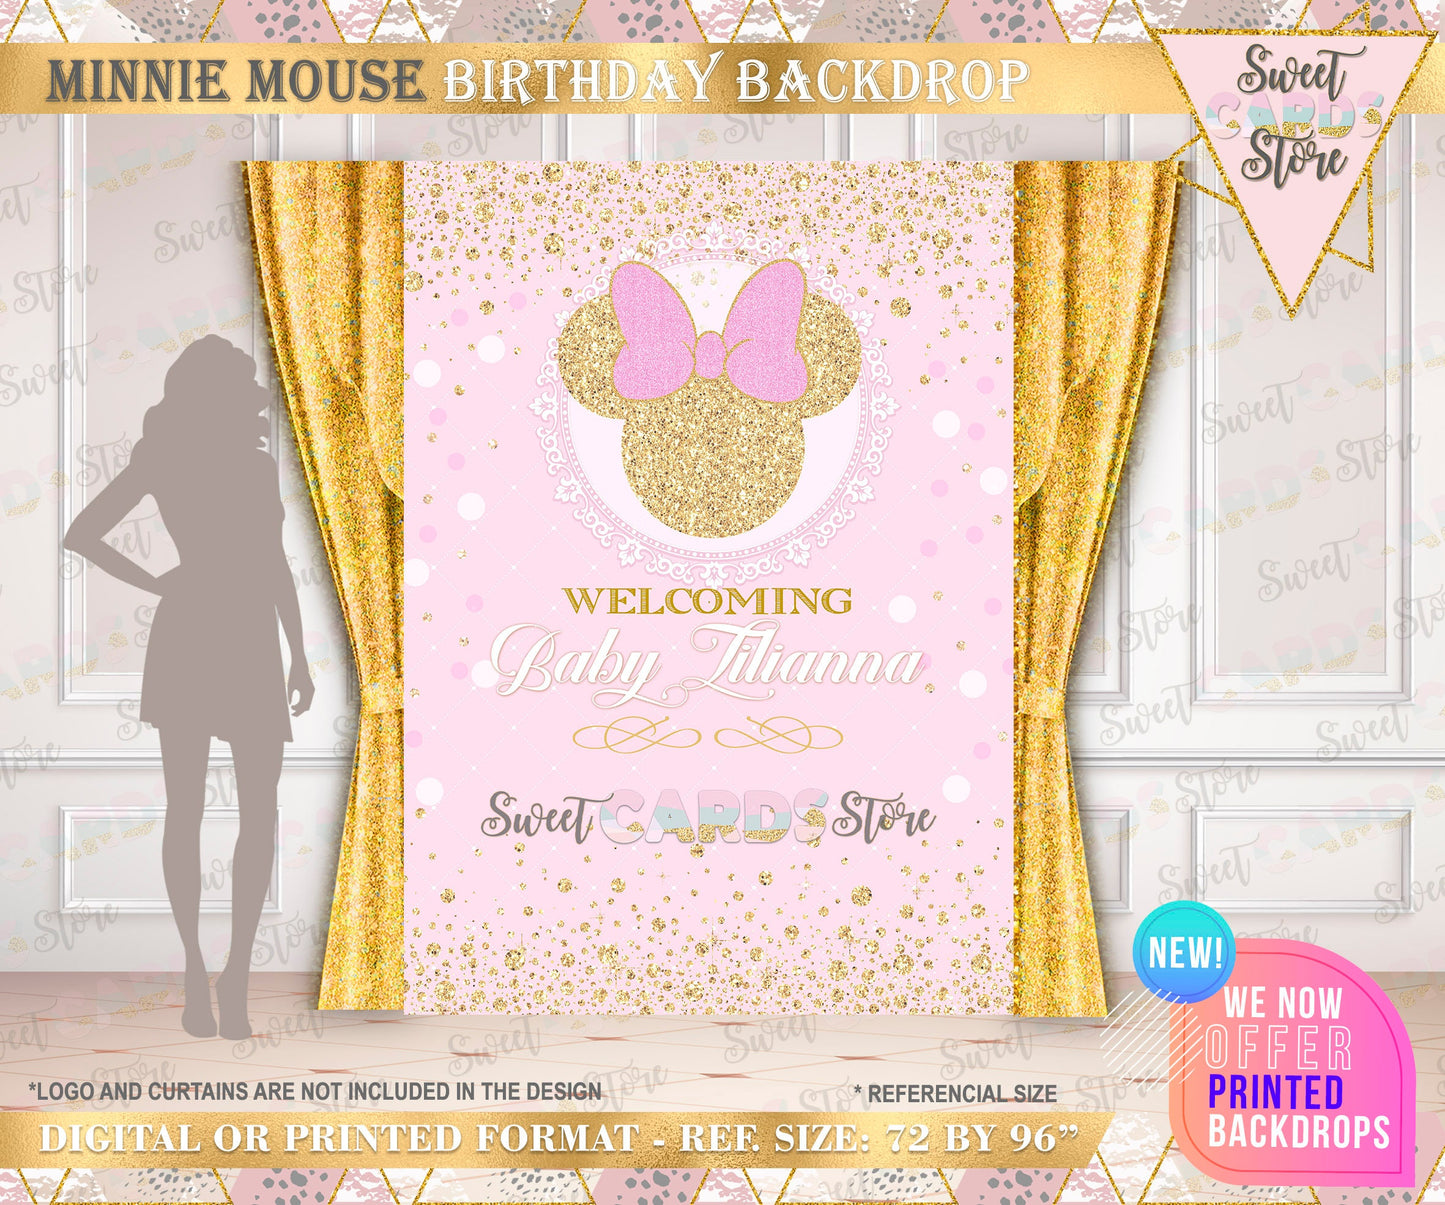 Minnie mouse party backdrop, minnie baby shower backdrop, minnie mouse banner, minnie glitter baby shower backdrop decor, minnie glitter